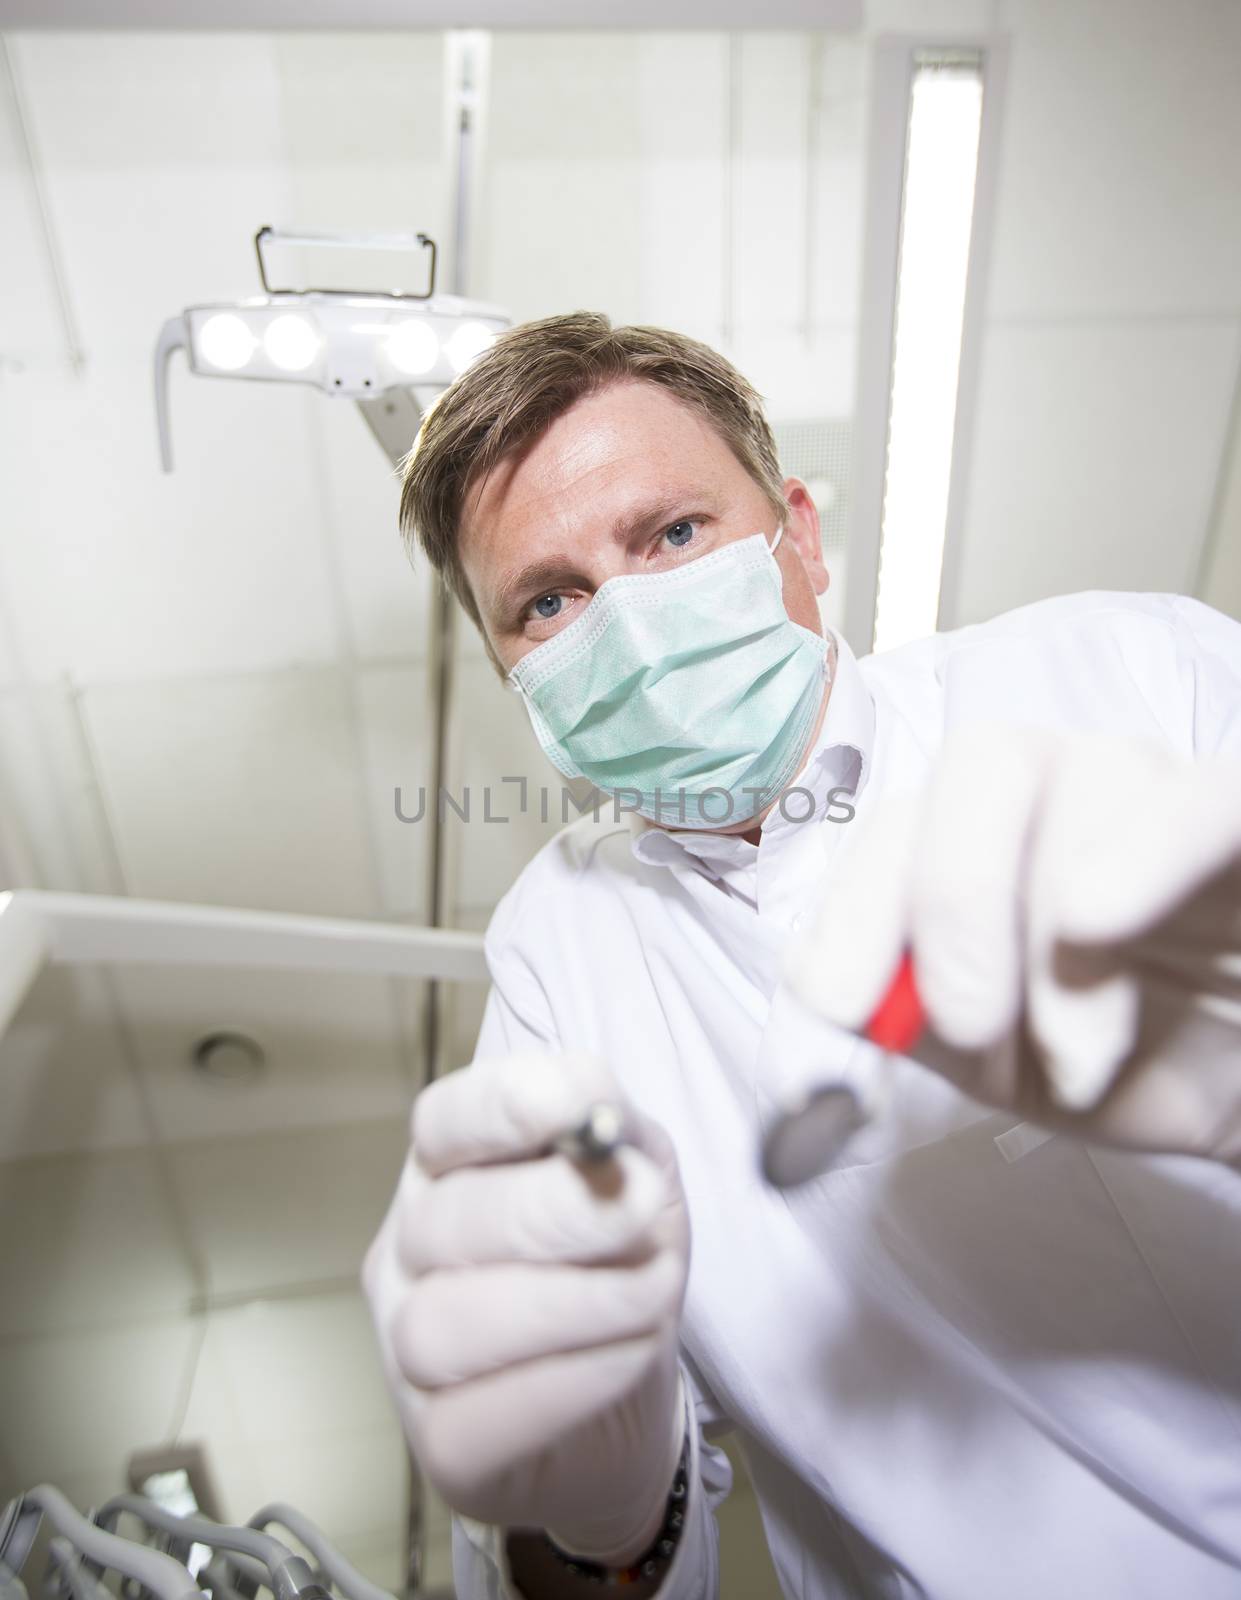 Dentist in action by gemenacom